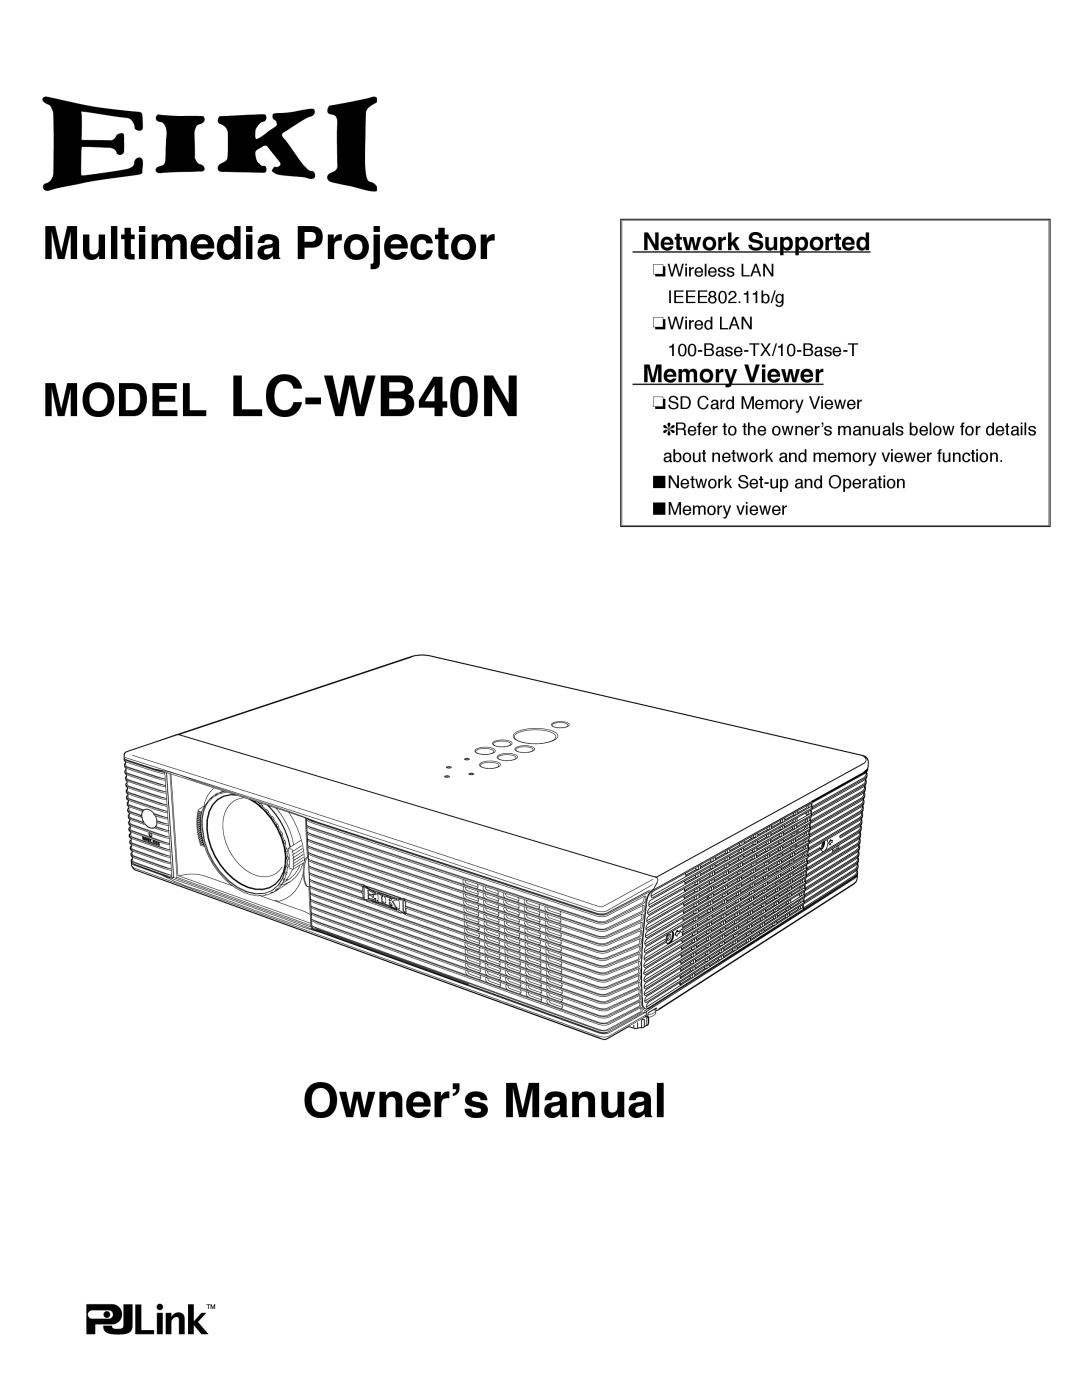 Eiki owner manual Network Supported, Memory Viewer, MODEL LC-WB40N, Owner’s Manual, Multimedia Projector 